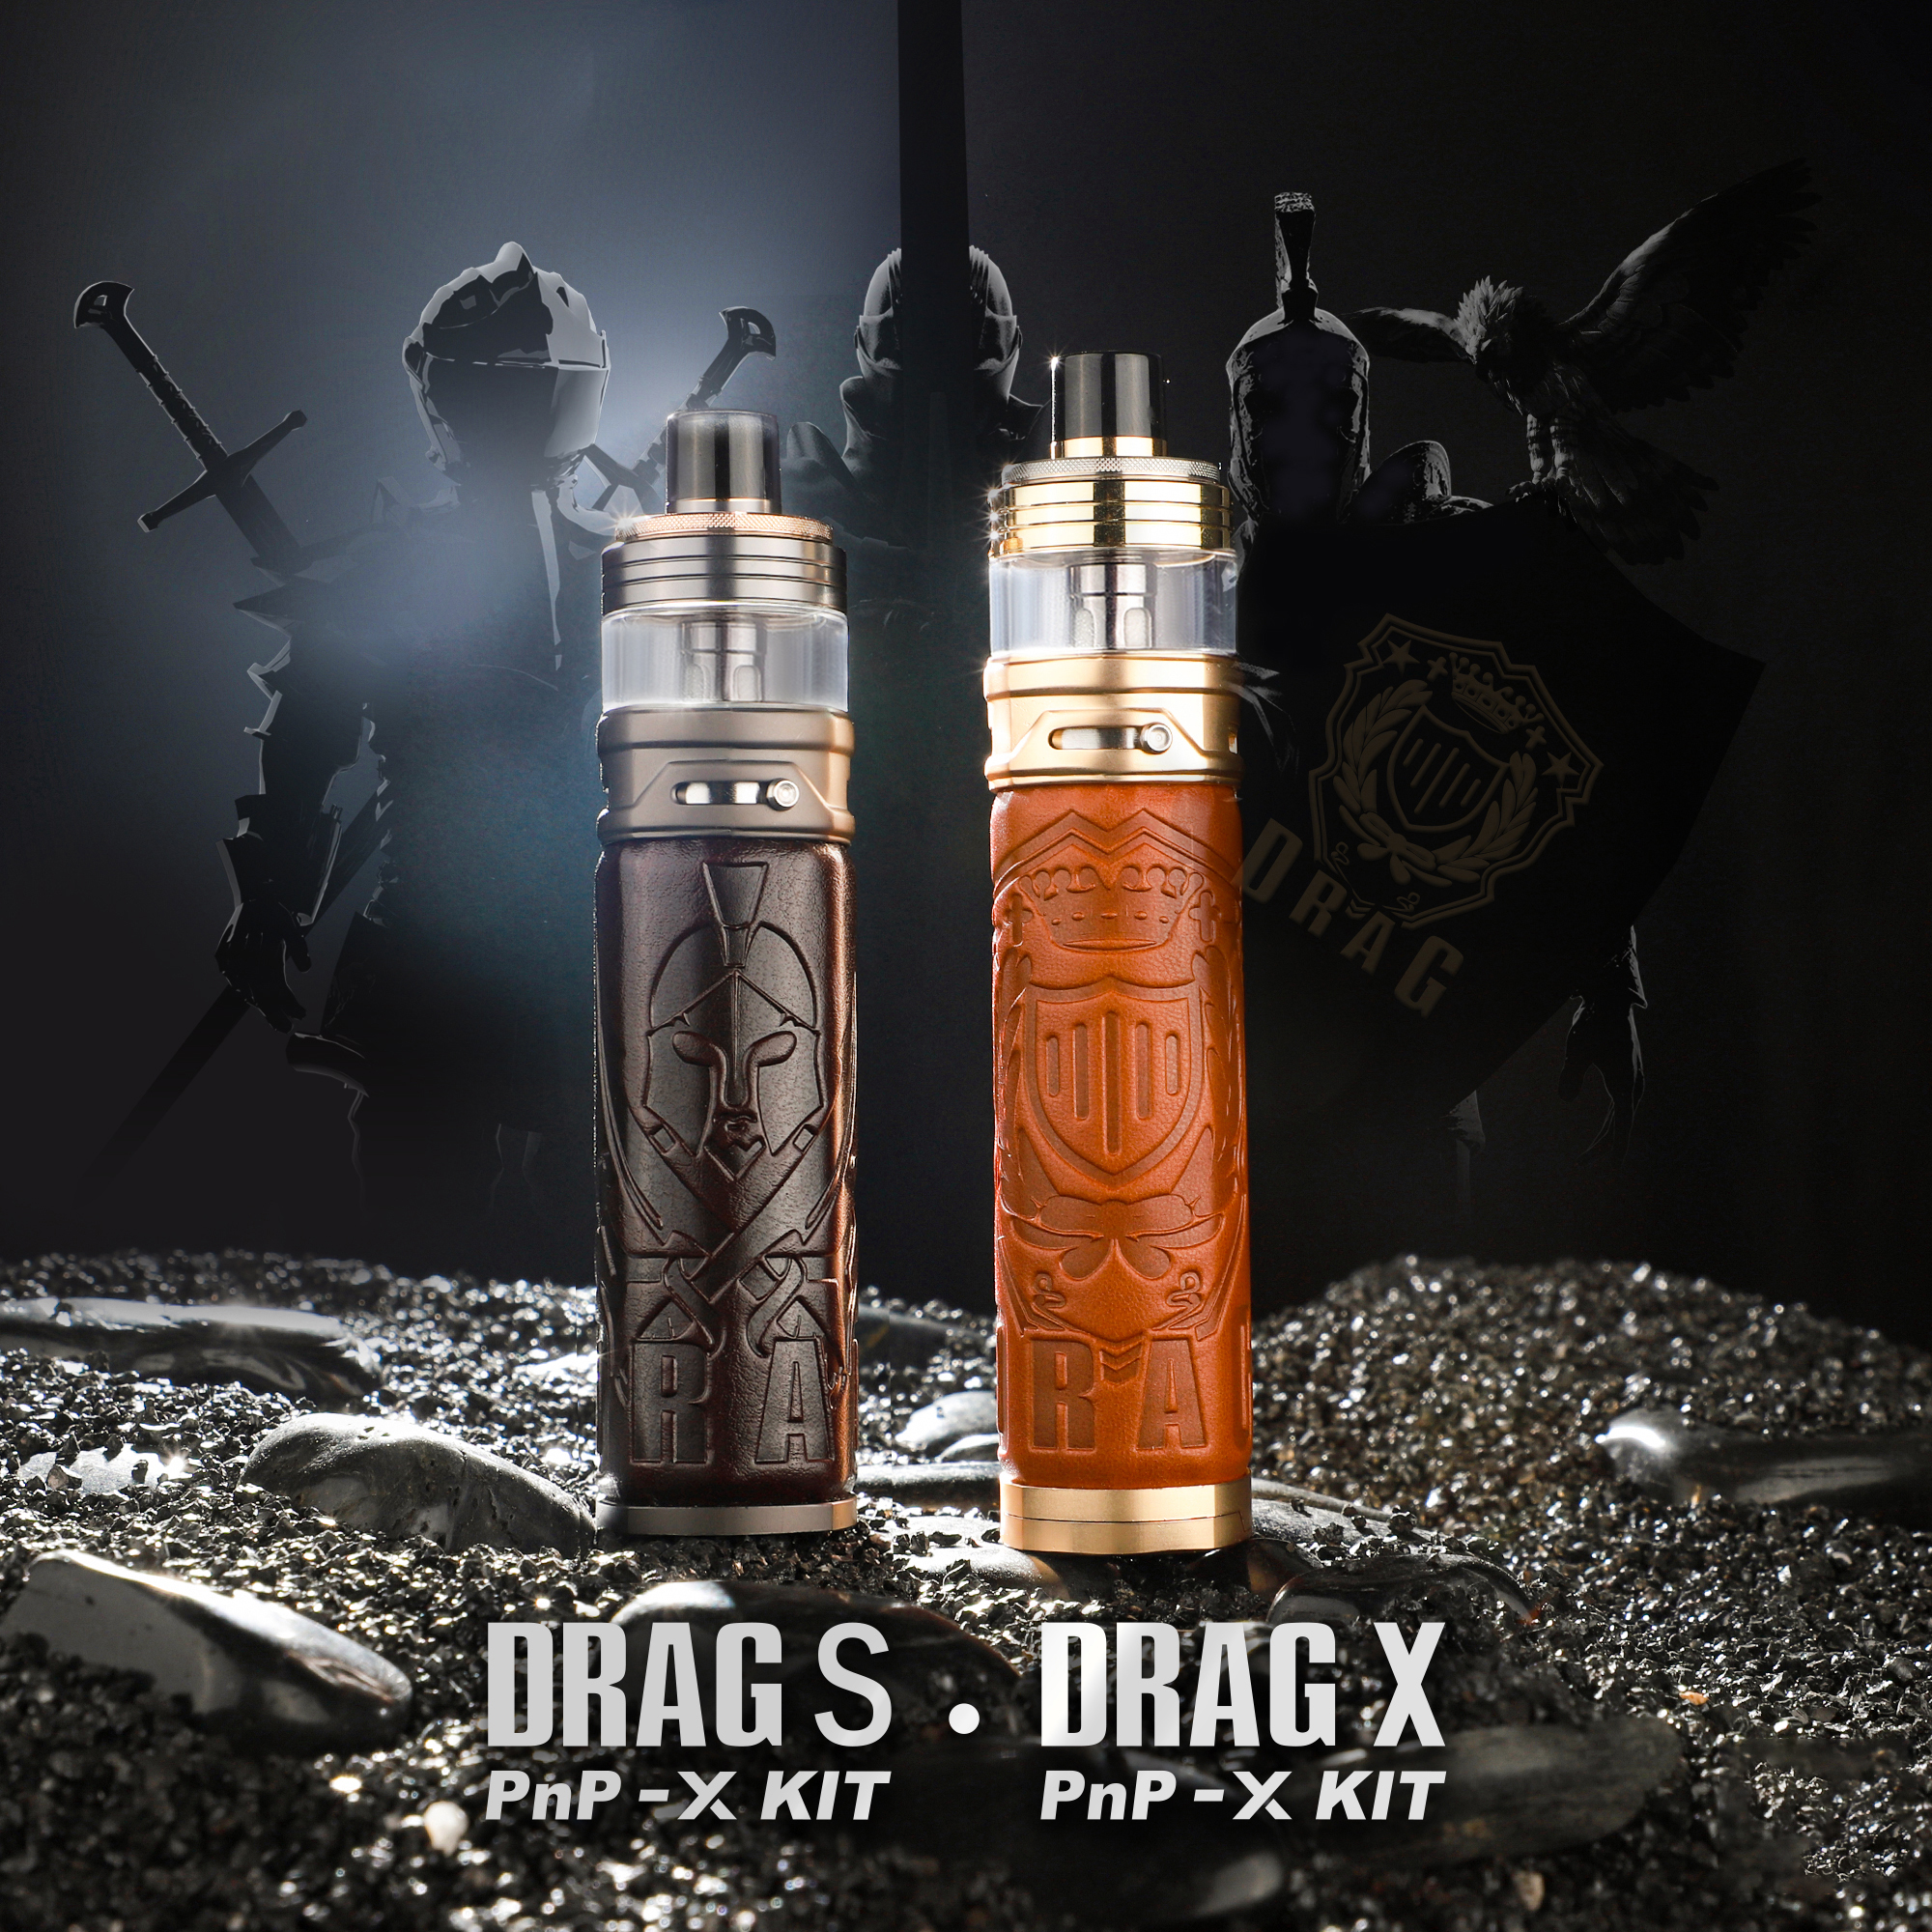 Coming Soon:VOOPOO Drag S PNP-X And Drag X PNP-X Kit Voopoo-drag-s-pnp-x-kit01